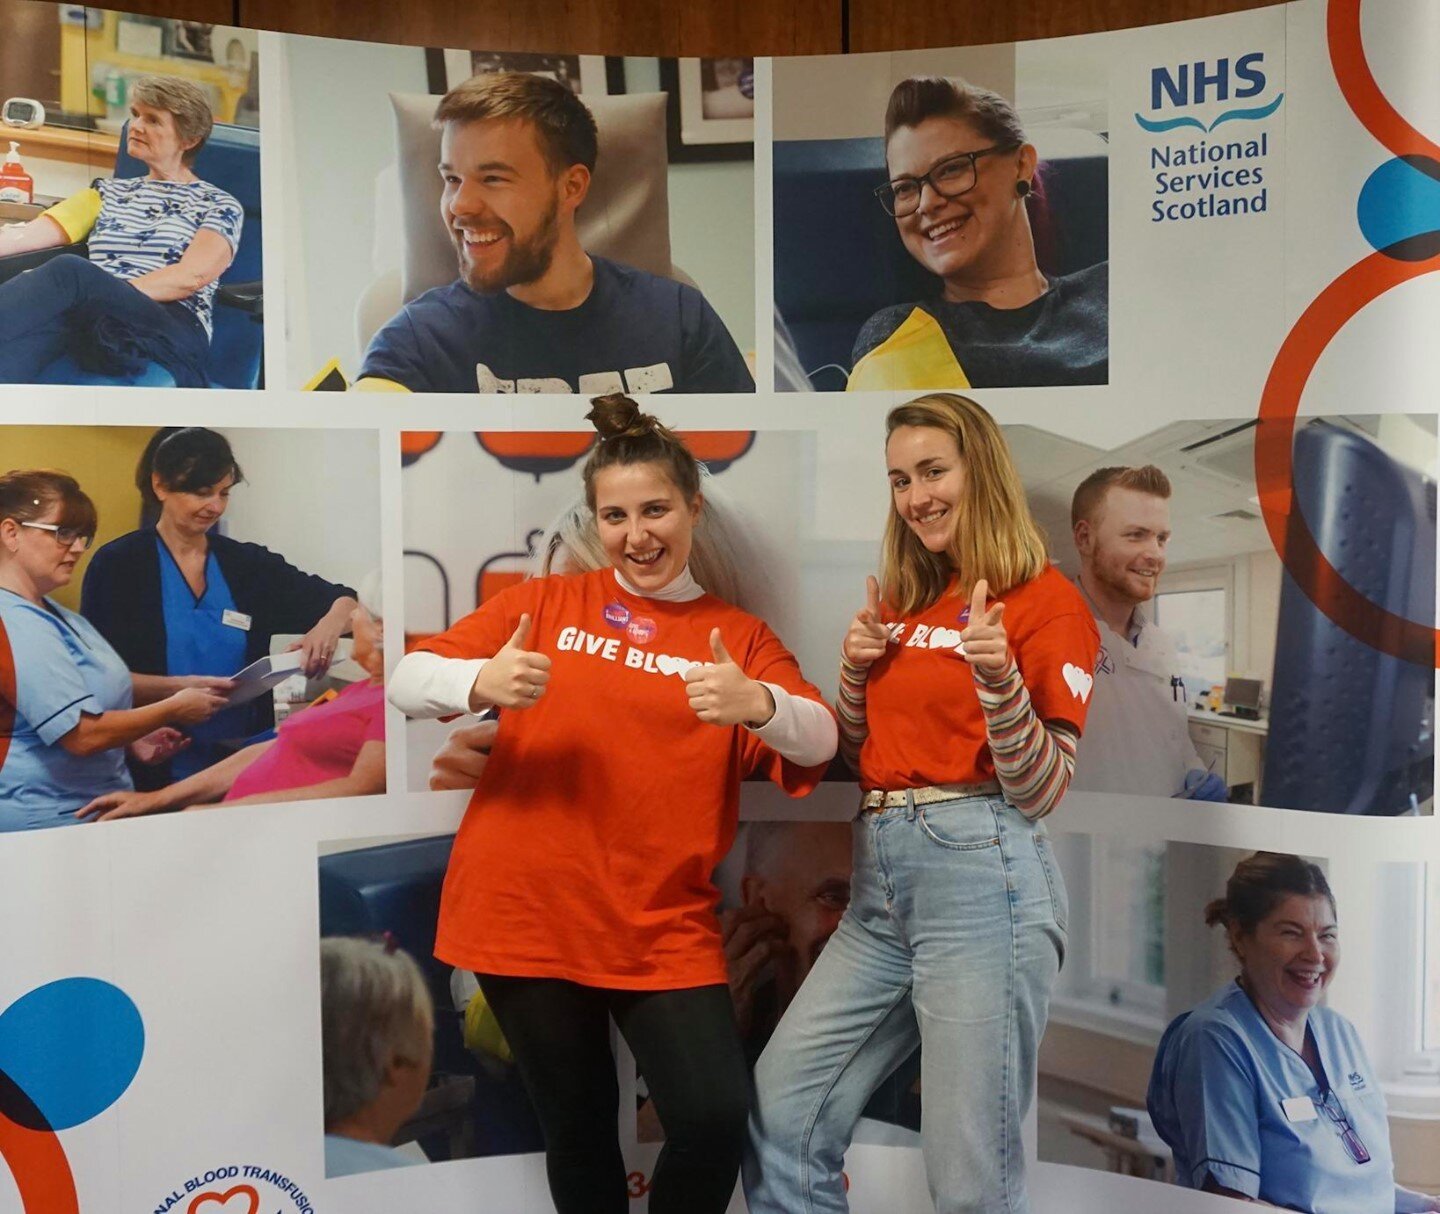 Happy 73rd birthday to the NHS! 🎂🎉💙

Today we would like to say thank you to all of the NHS staff and volunteers who continue to look after us and save lives everyday. 

One of the best experiences about giving blood is speaking to the fabulous NH